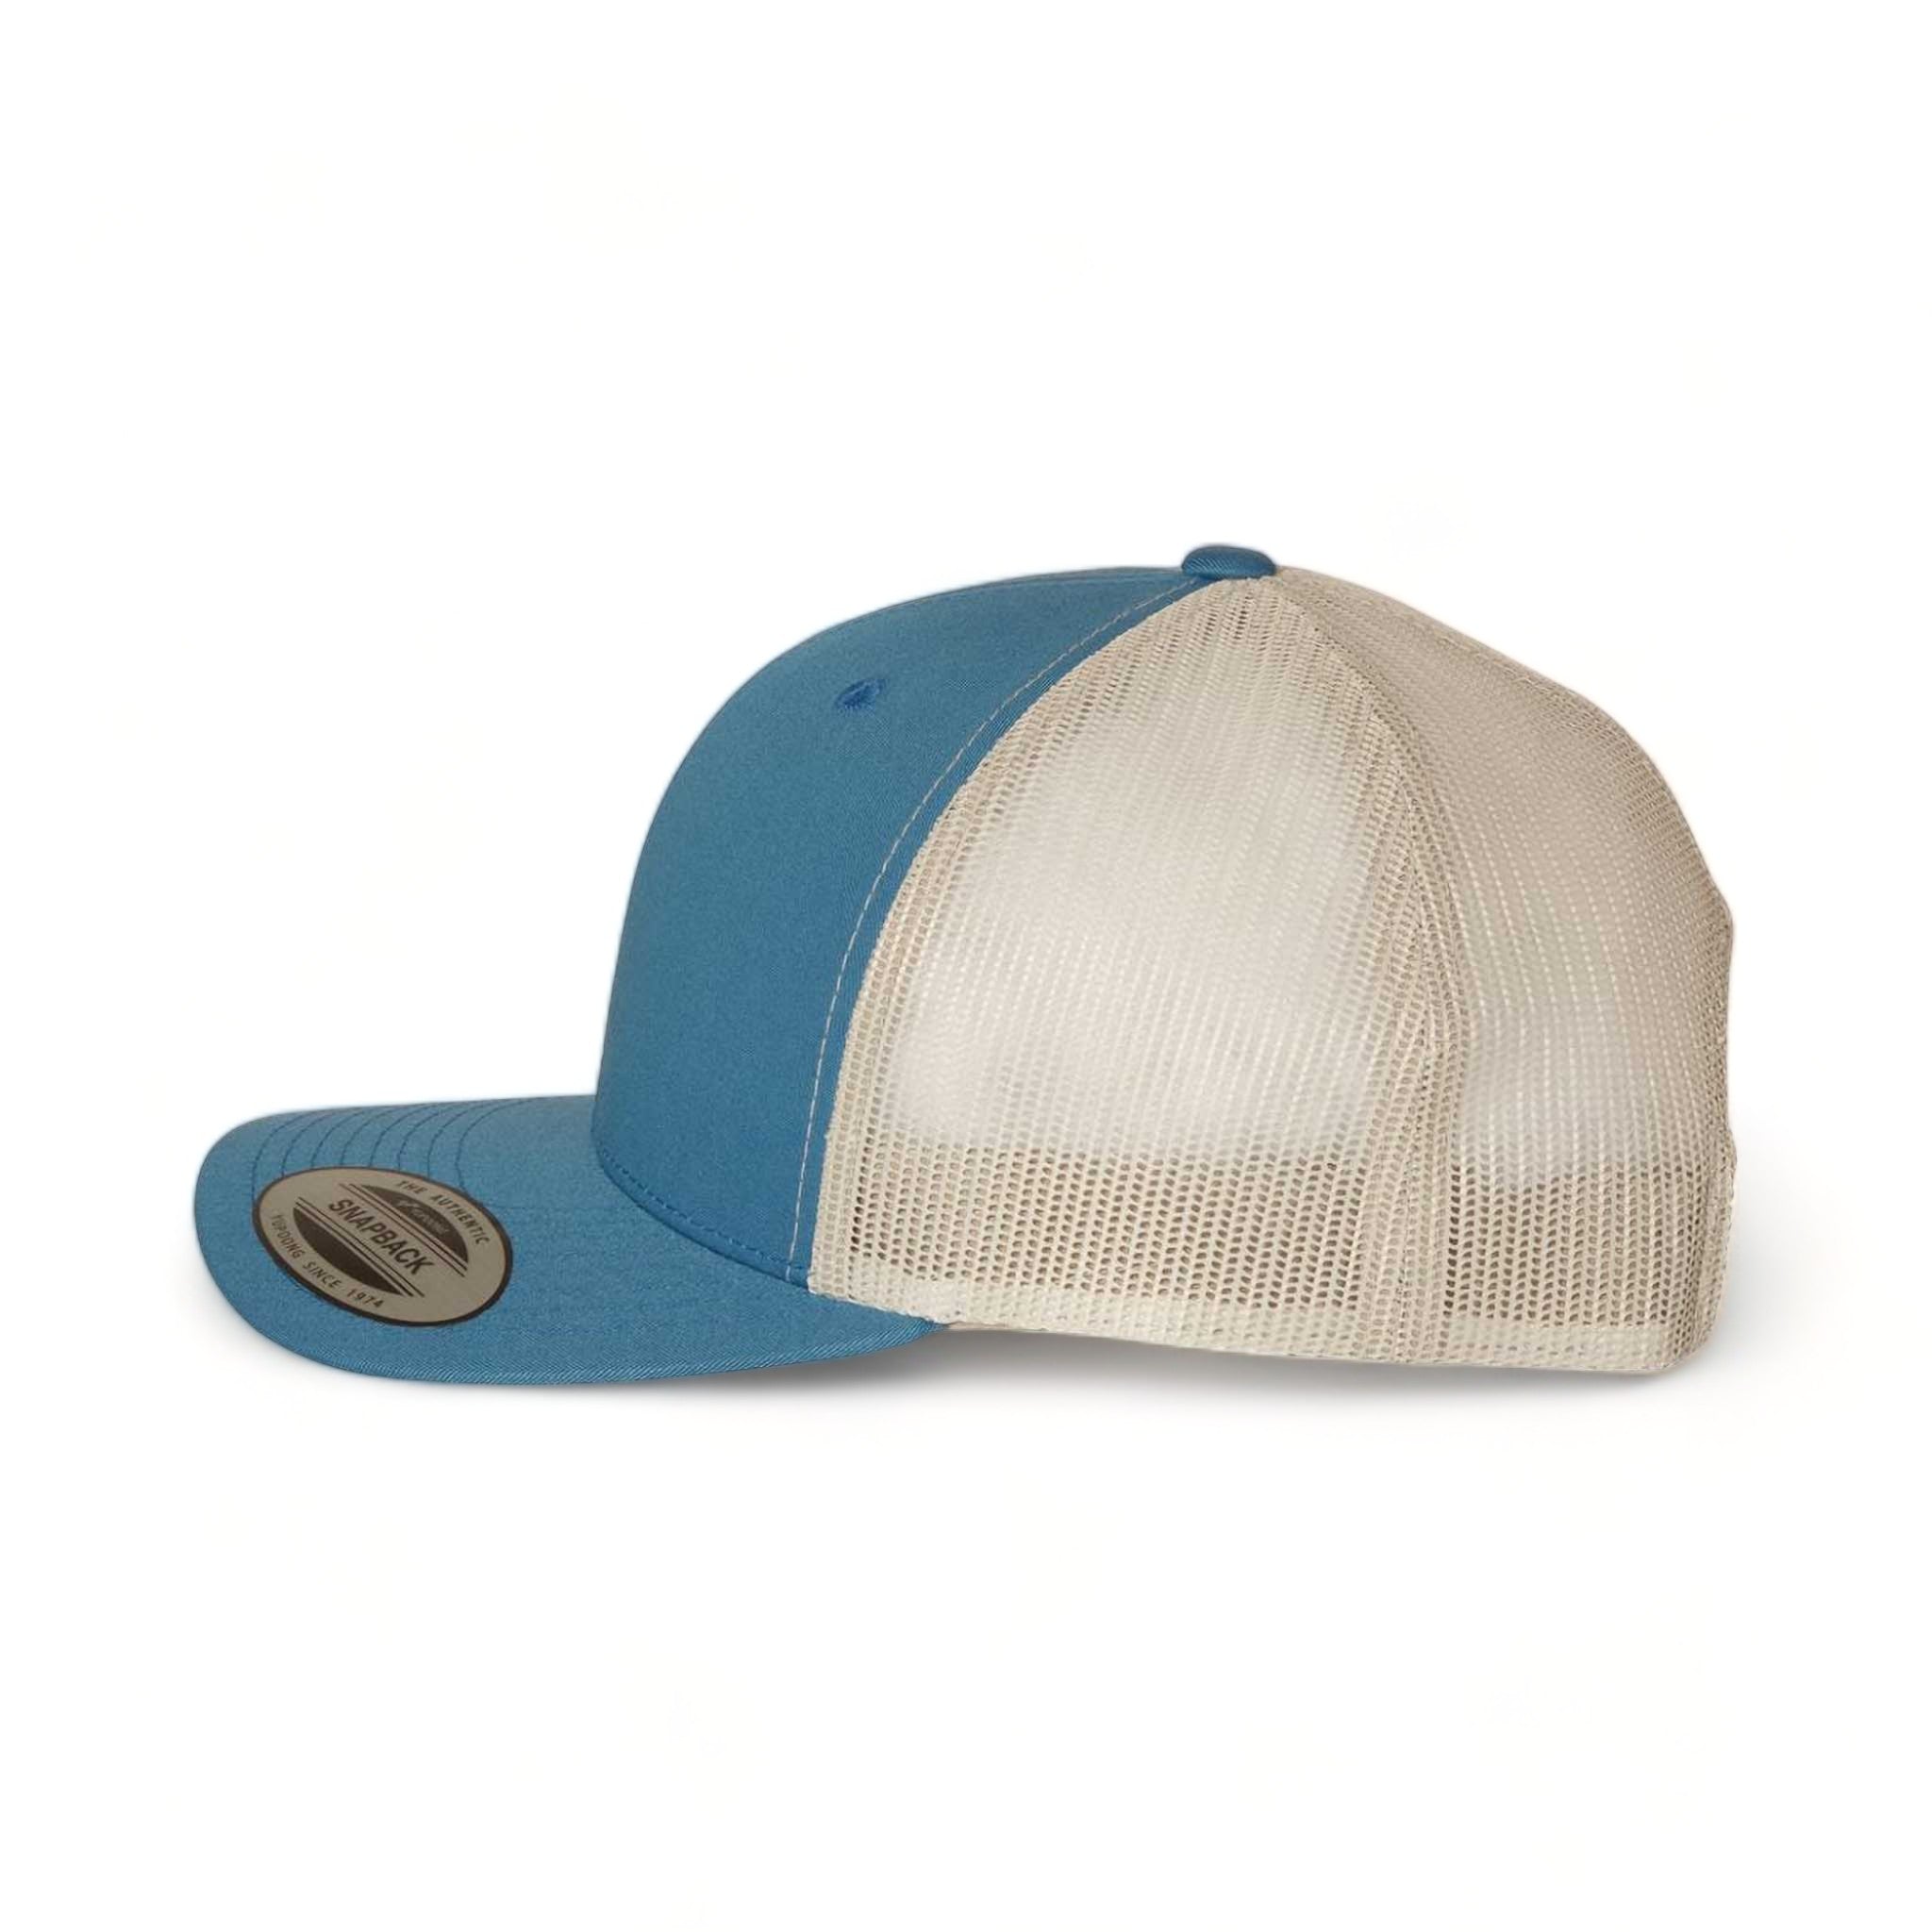 Side view of YP Classics 6606 custom hat in steel blue and silver